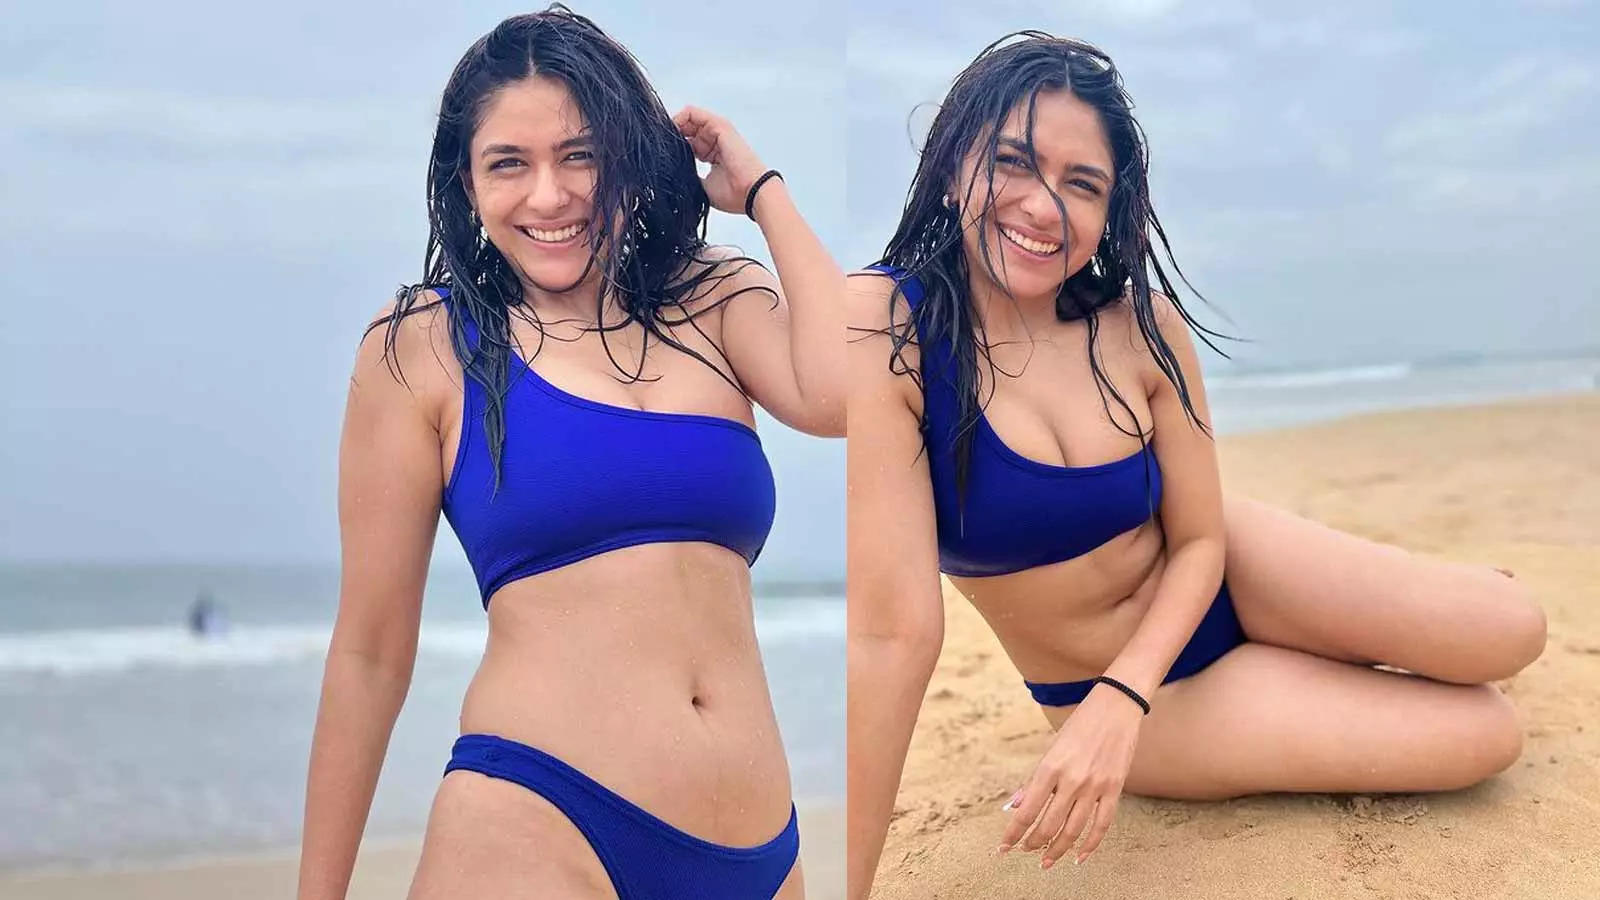 Mrunal Thakur Bikini Photo, Images, Pictures, Video Mrunal Thakur shares bikini photos from her beach vacation; fans say This is not our Sita 